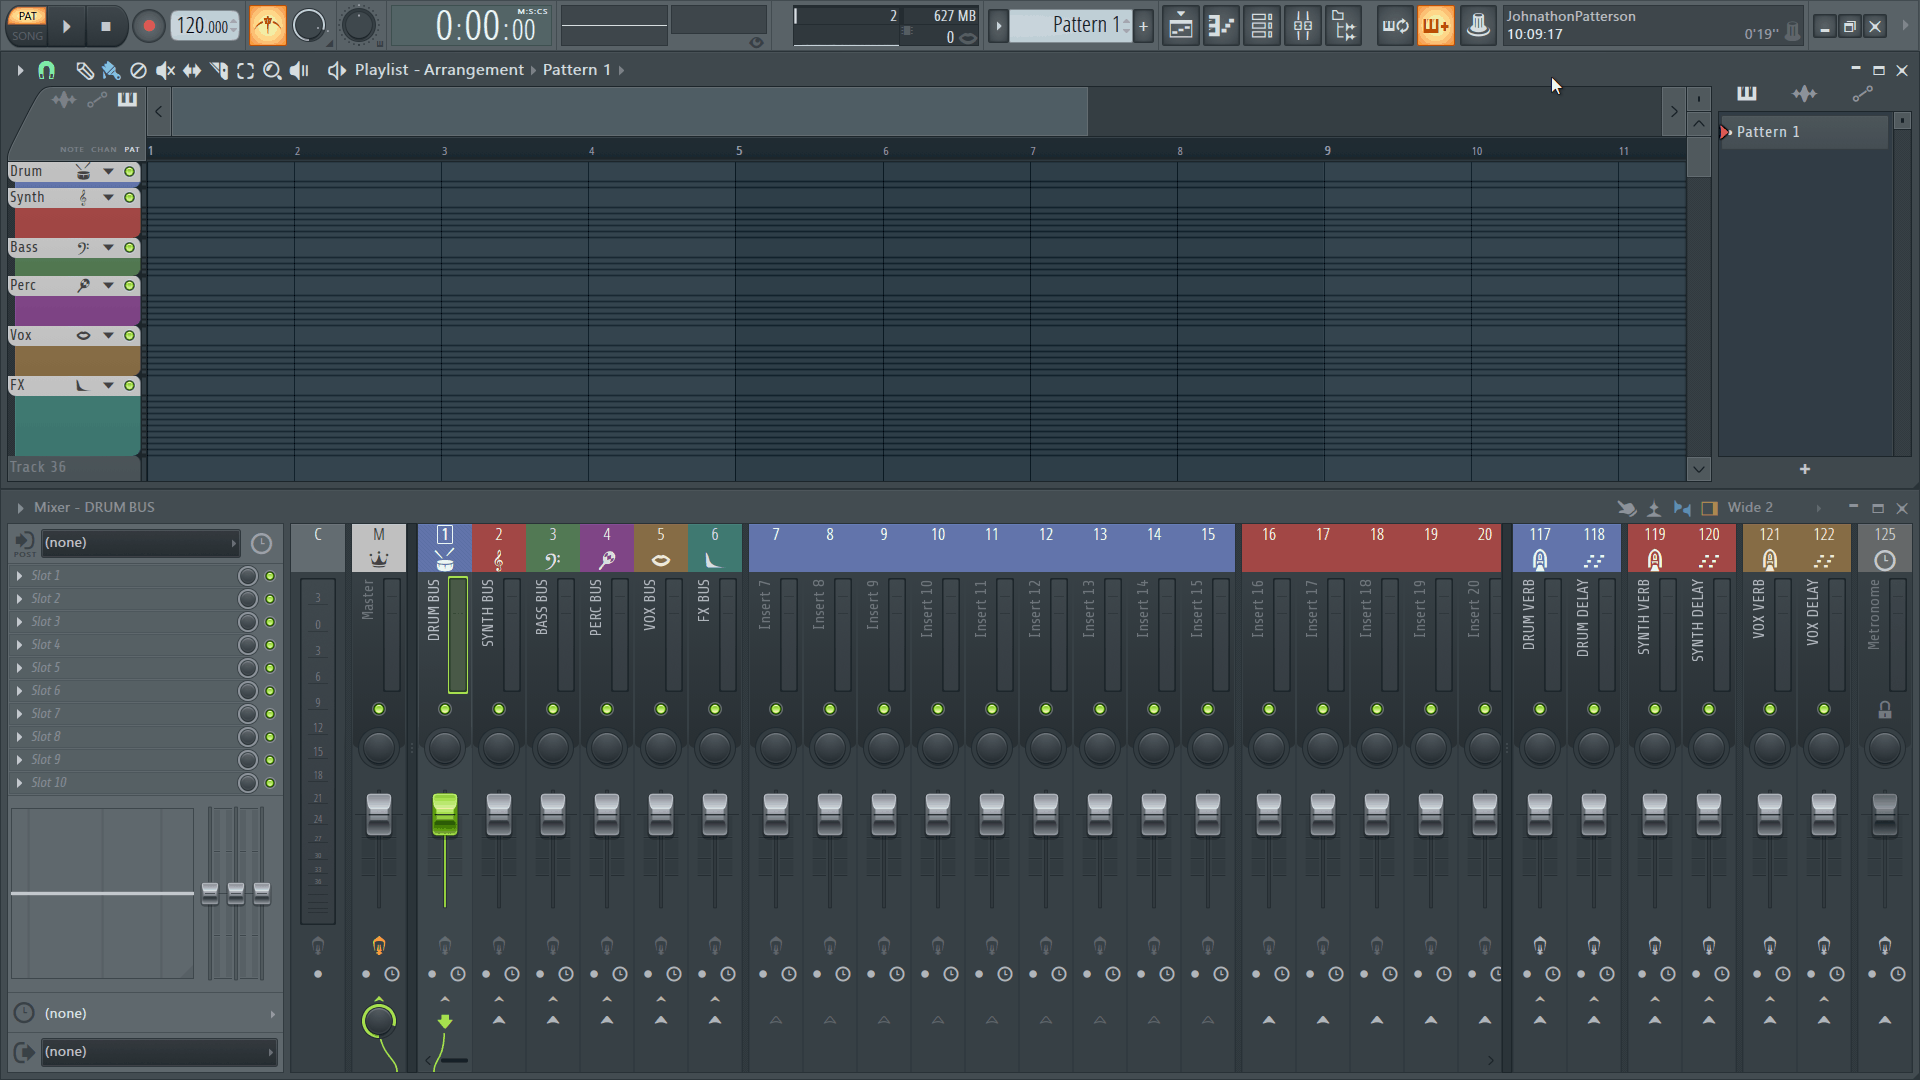 fl studio trial is better than fruity version